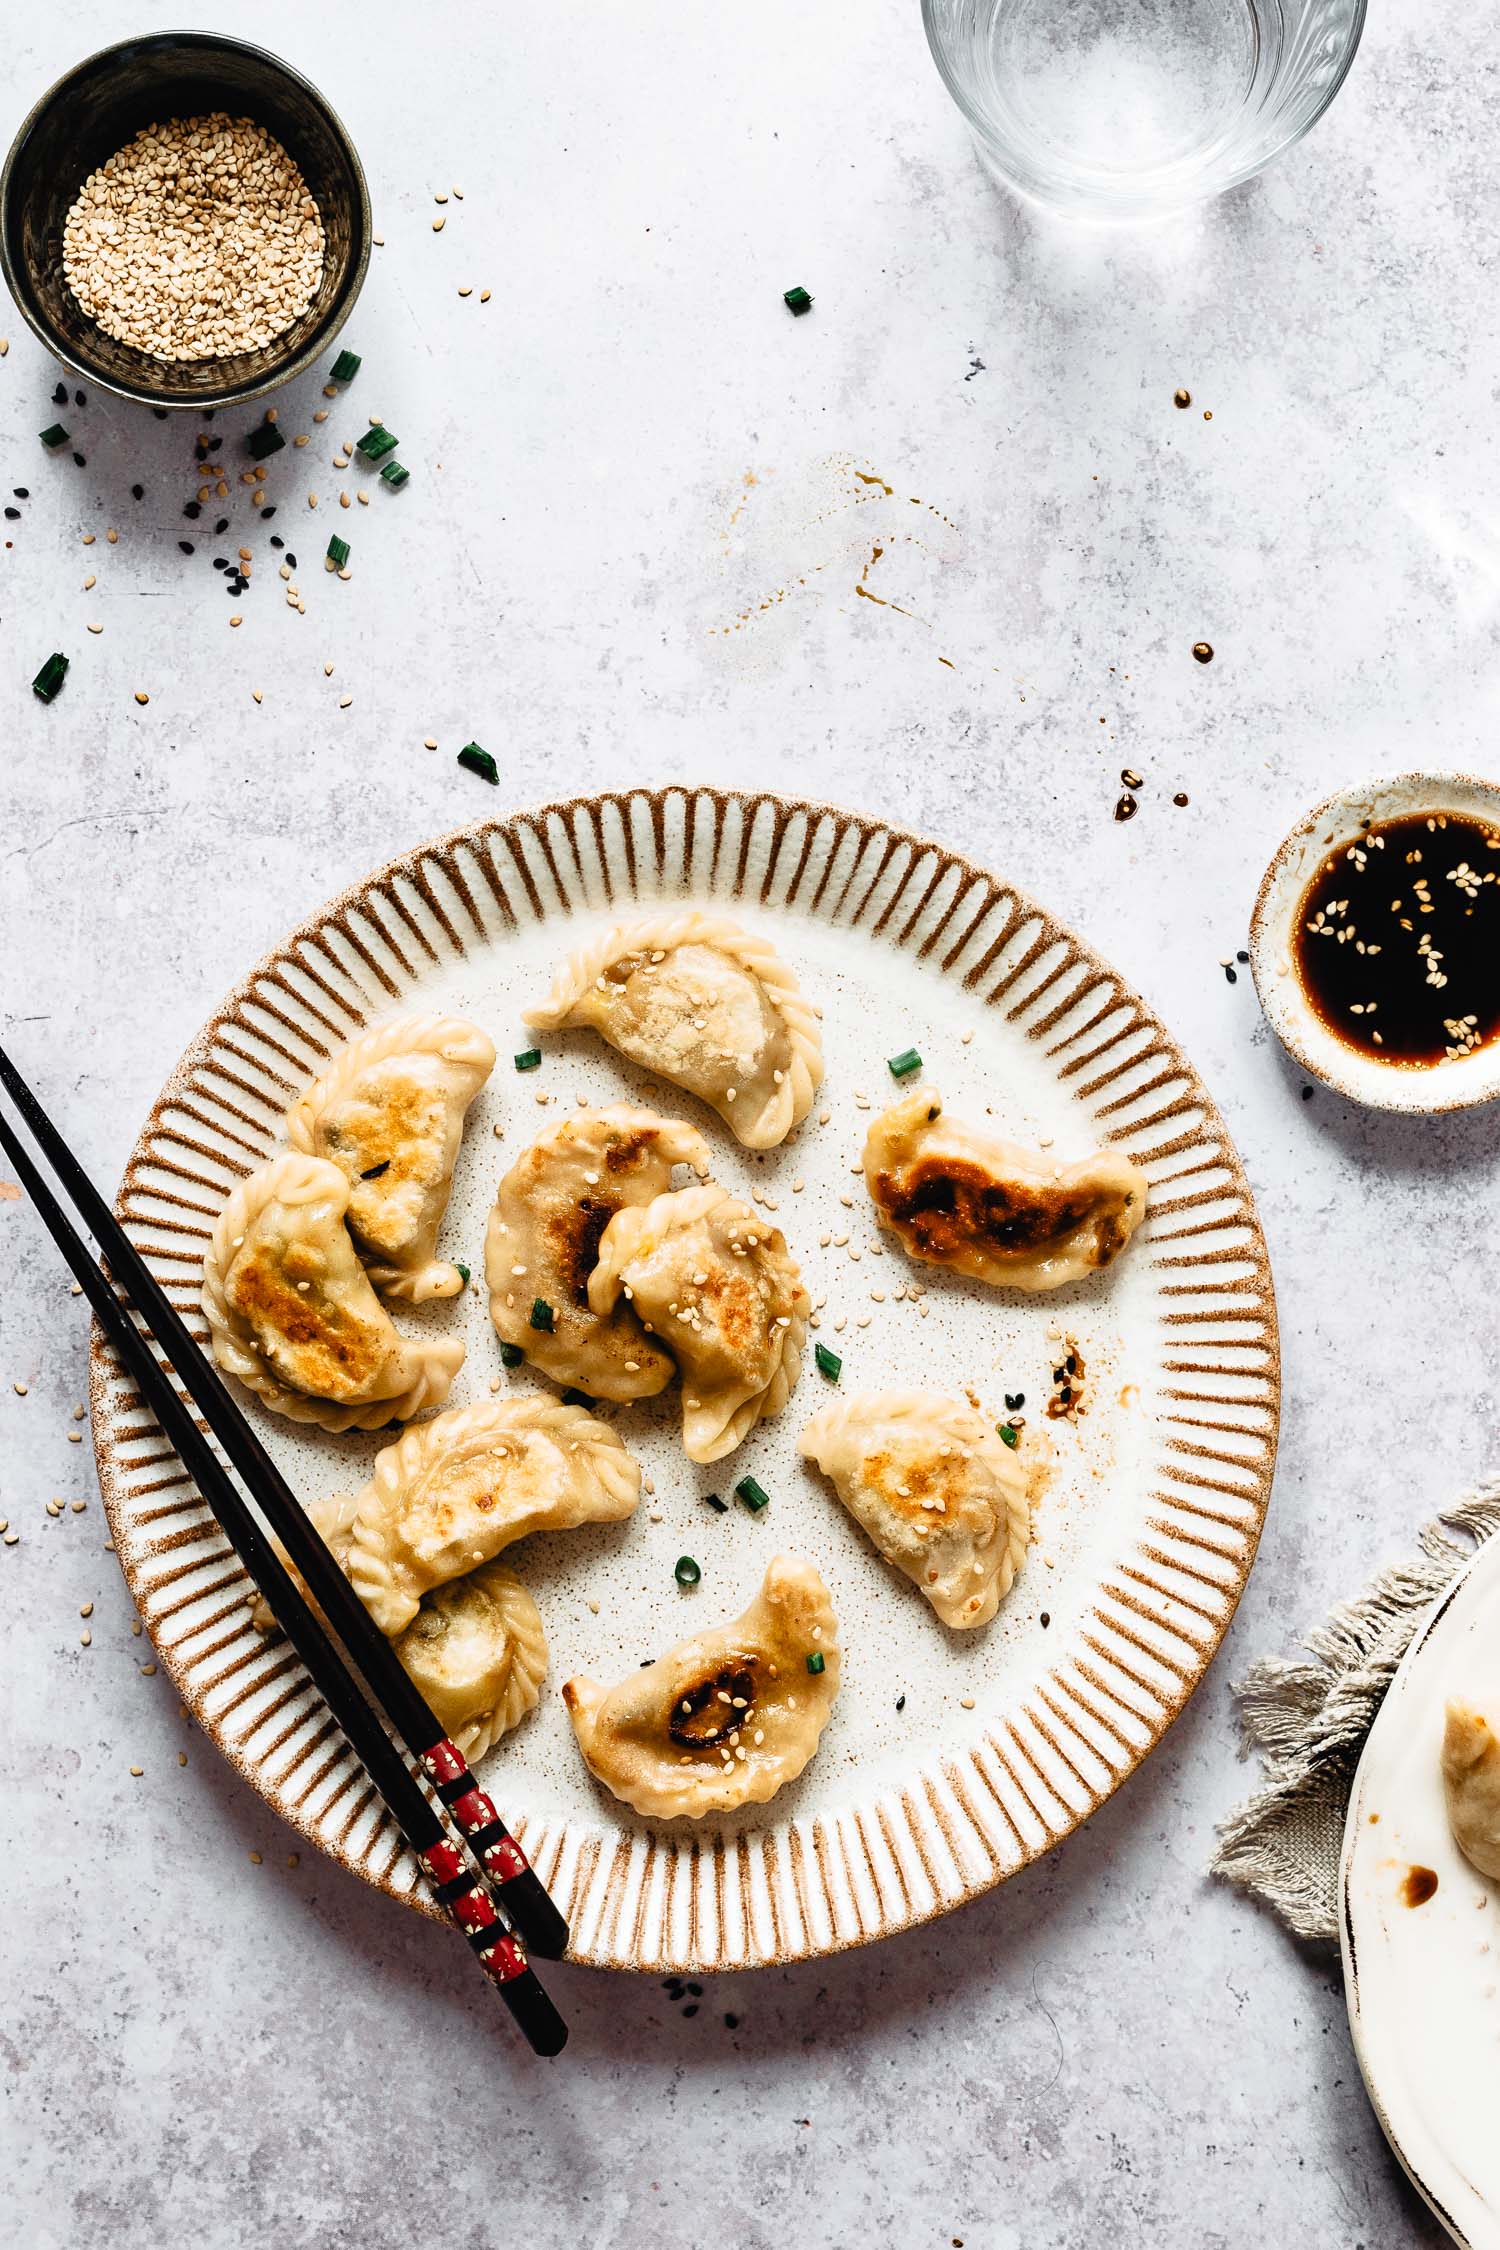 My potstickers recipe: easy to make from scratch!